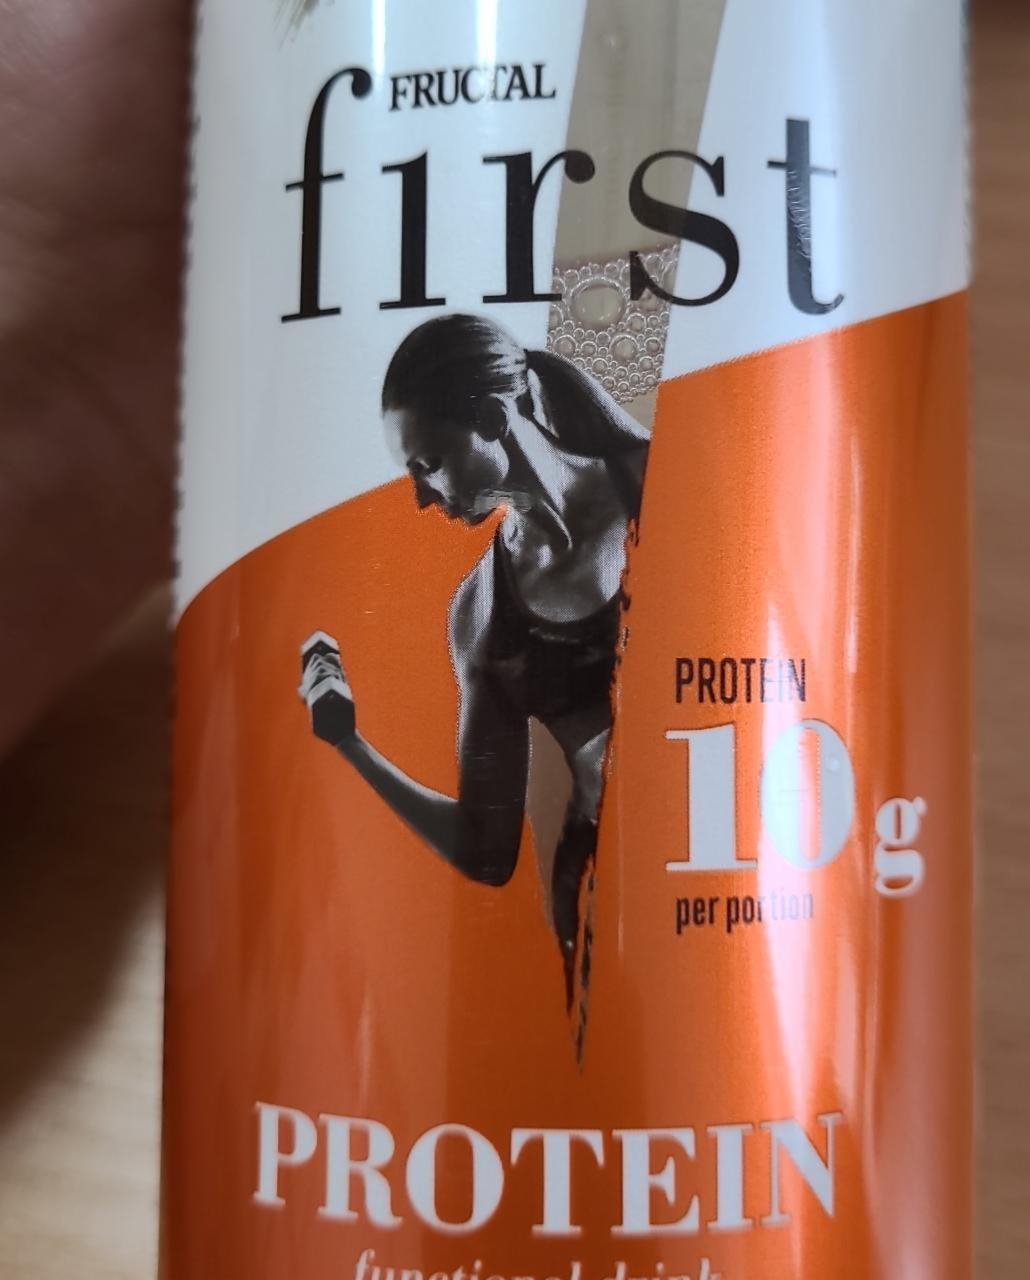 Fotografie - First 10g Protein peach rosemary Fructal